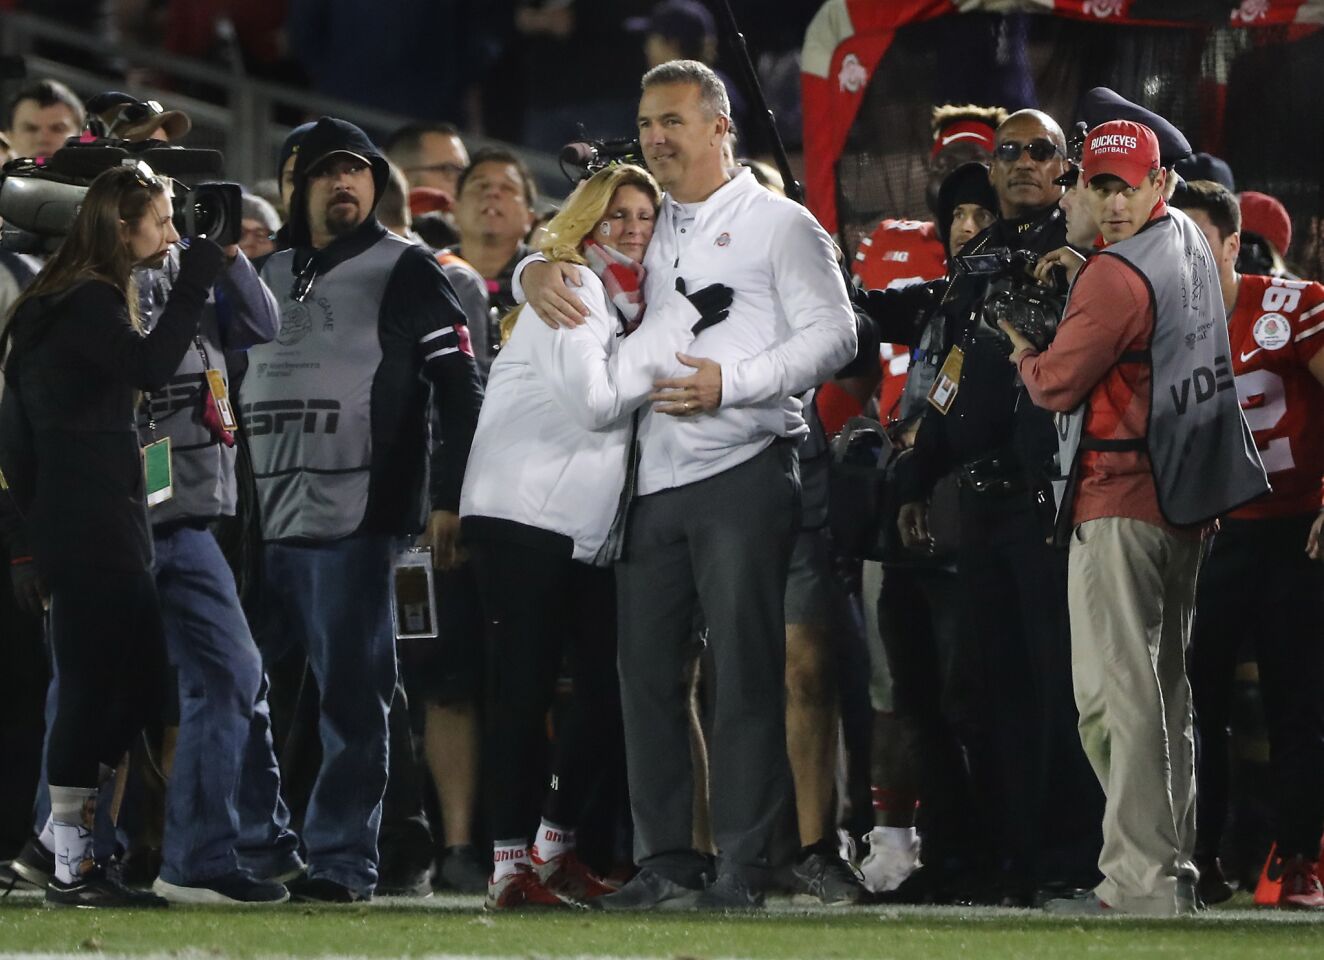 Ohio State coach Urban Meyer hugs his wife Shelley after the Buckeyes beat Washington 28-23 at the Rose Bowl on Jan. 1.